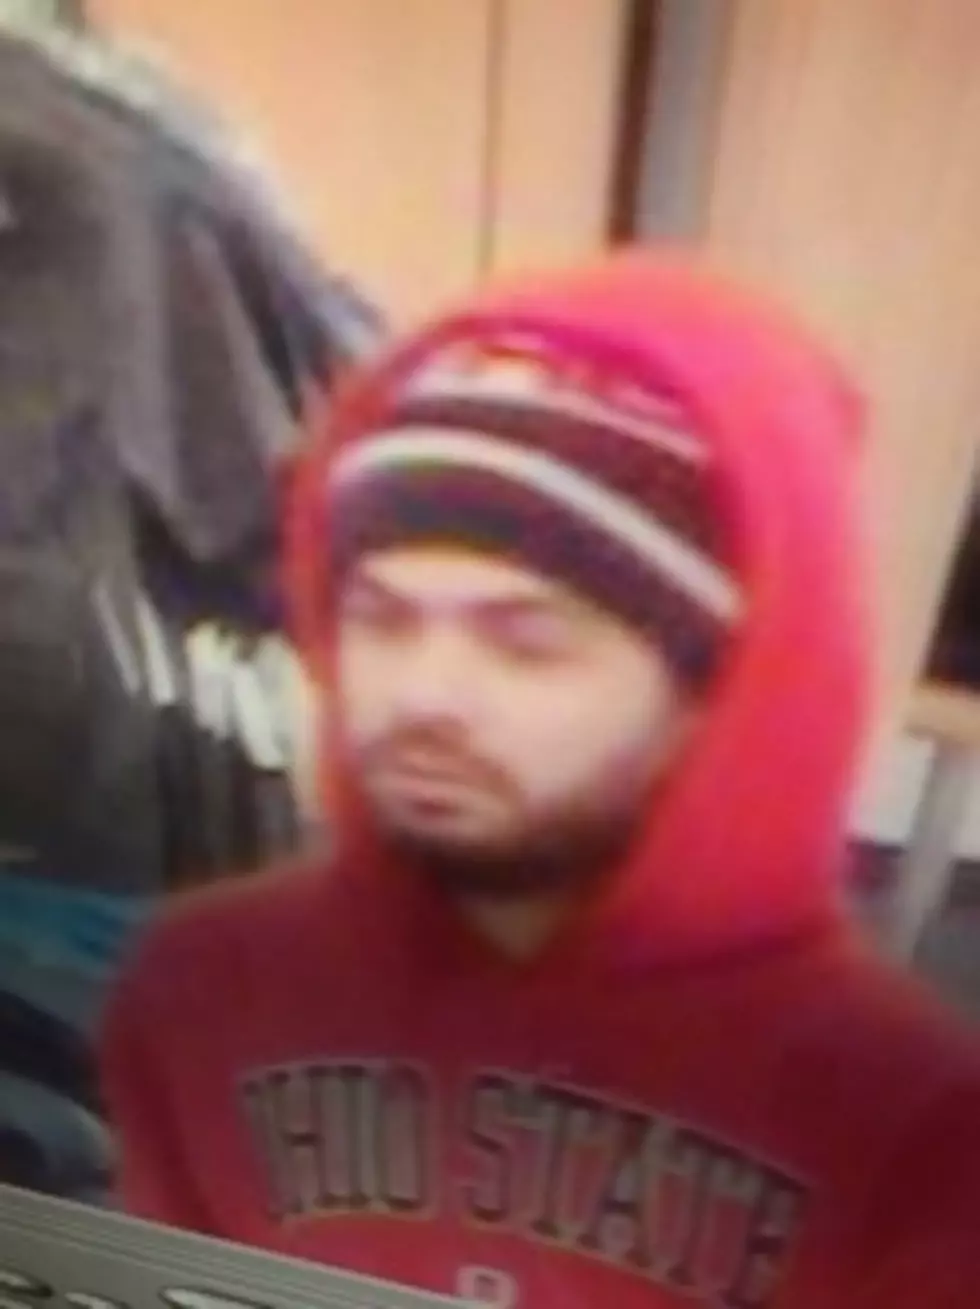 Dartmouth Police Searching for Shoplifting Suspect